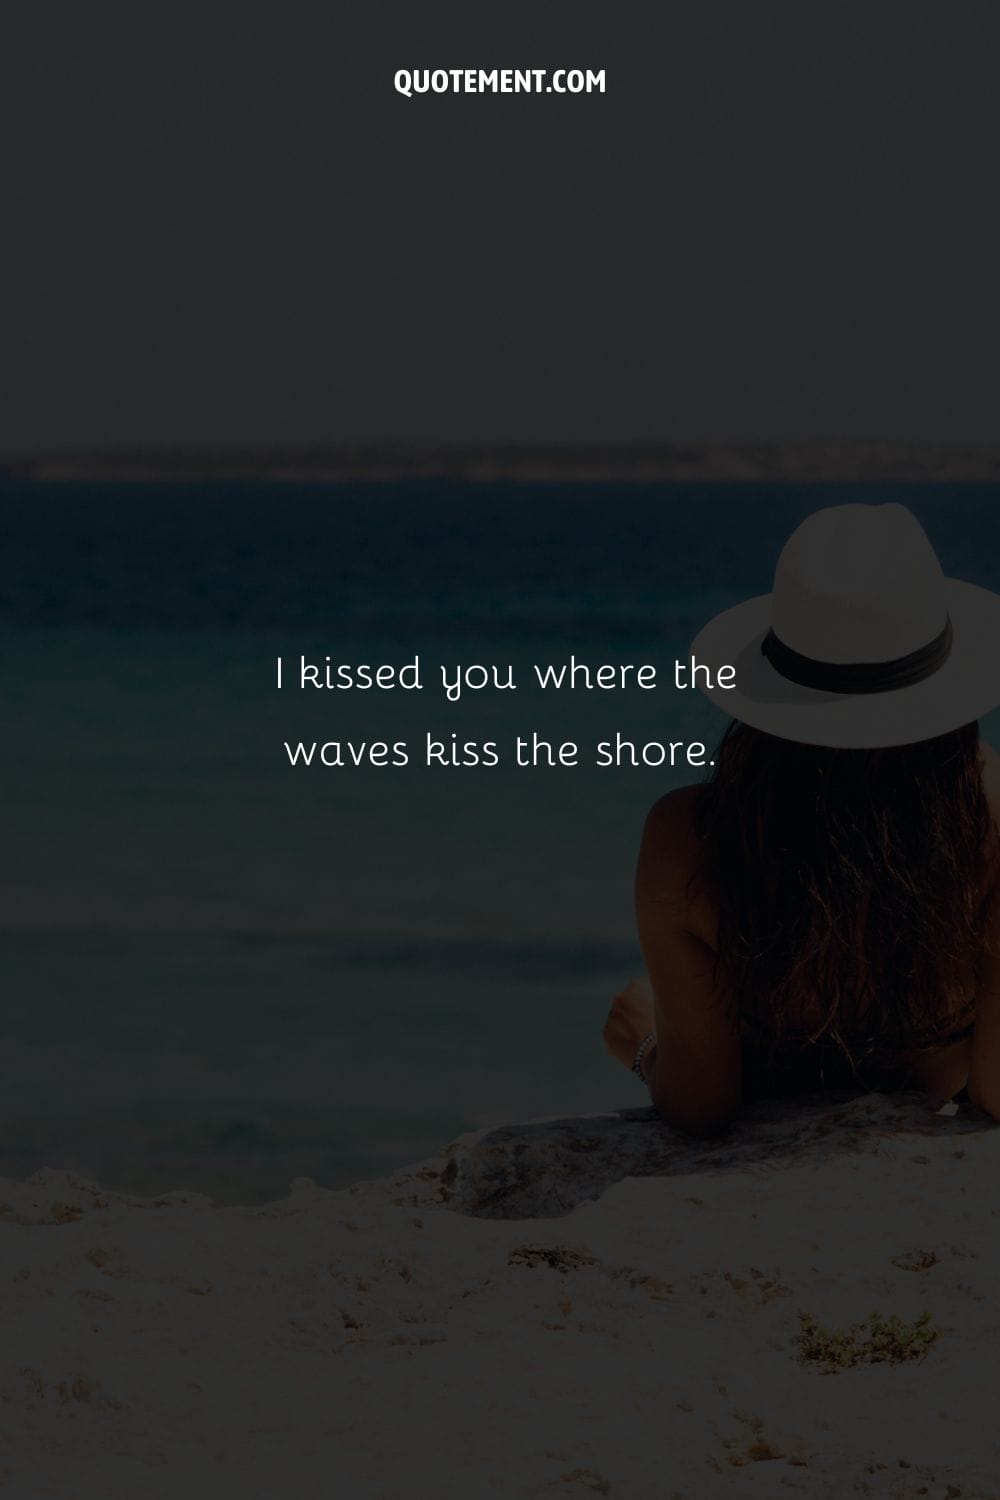 I kissed you where the waves kiss the shore.